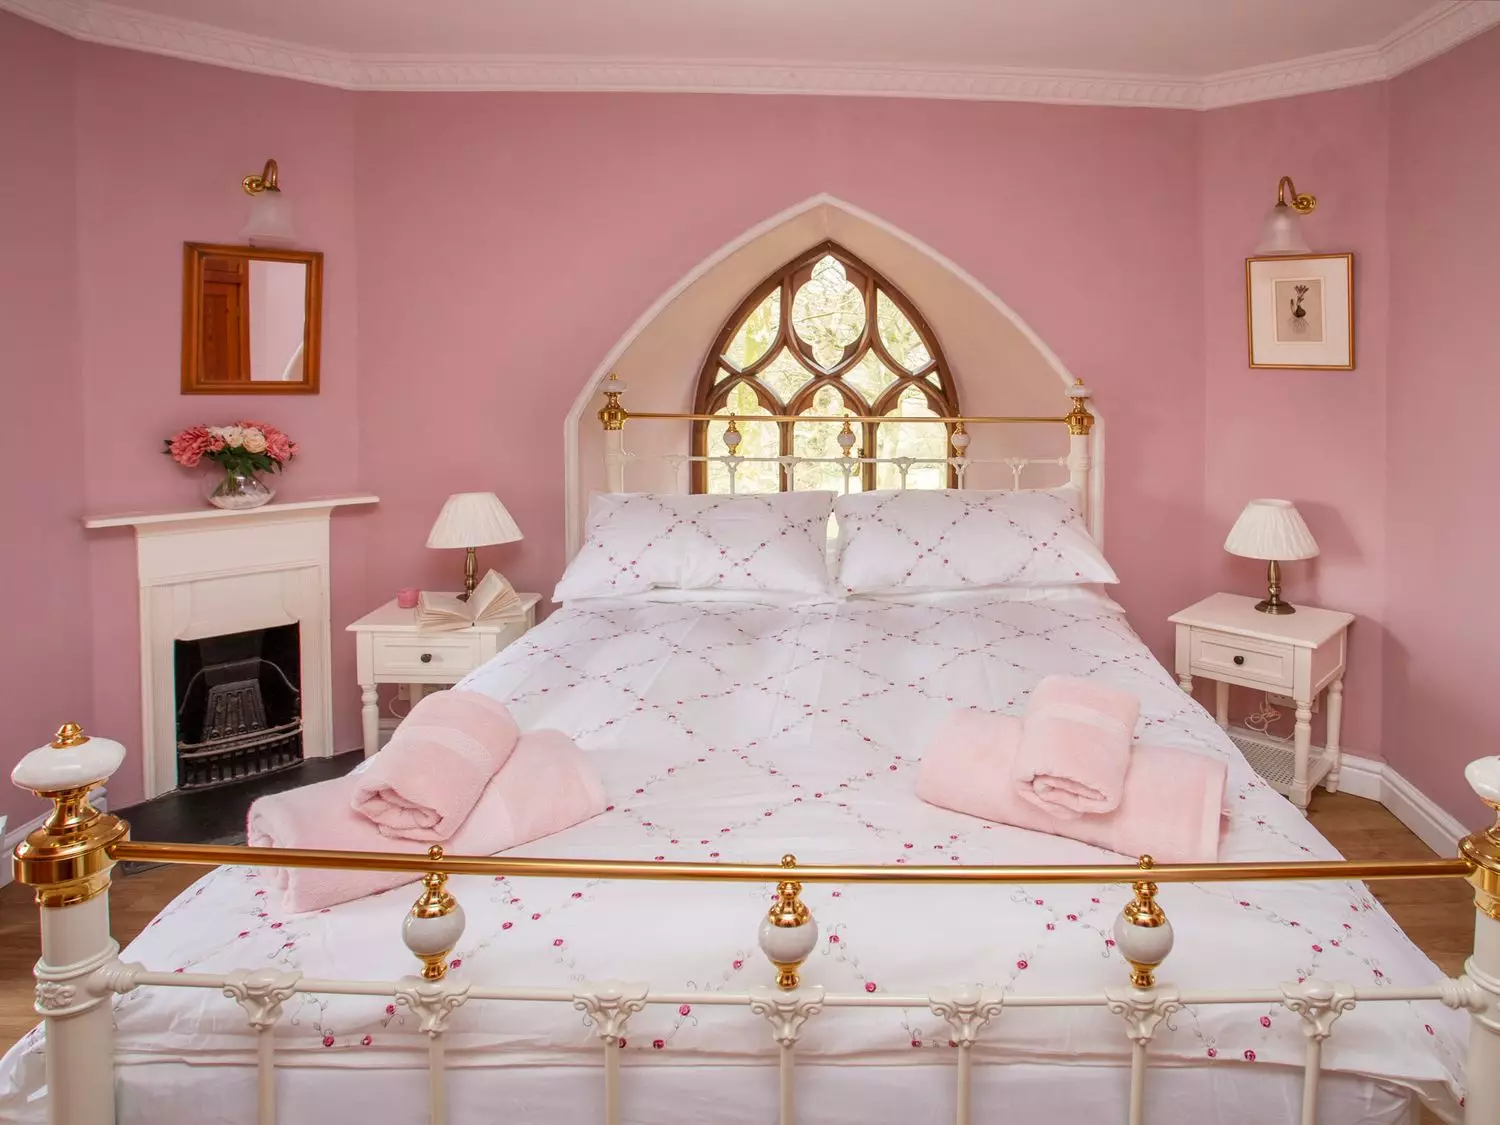 A bed fit for a princess (